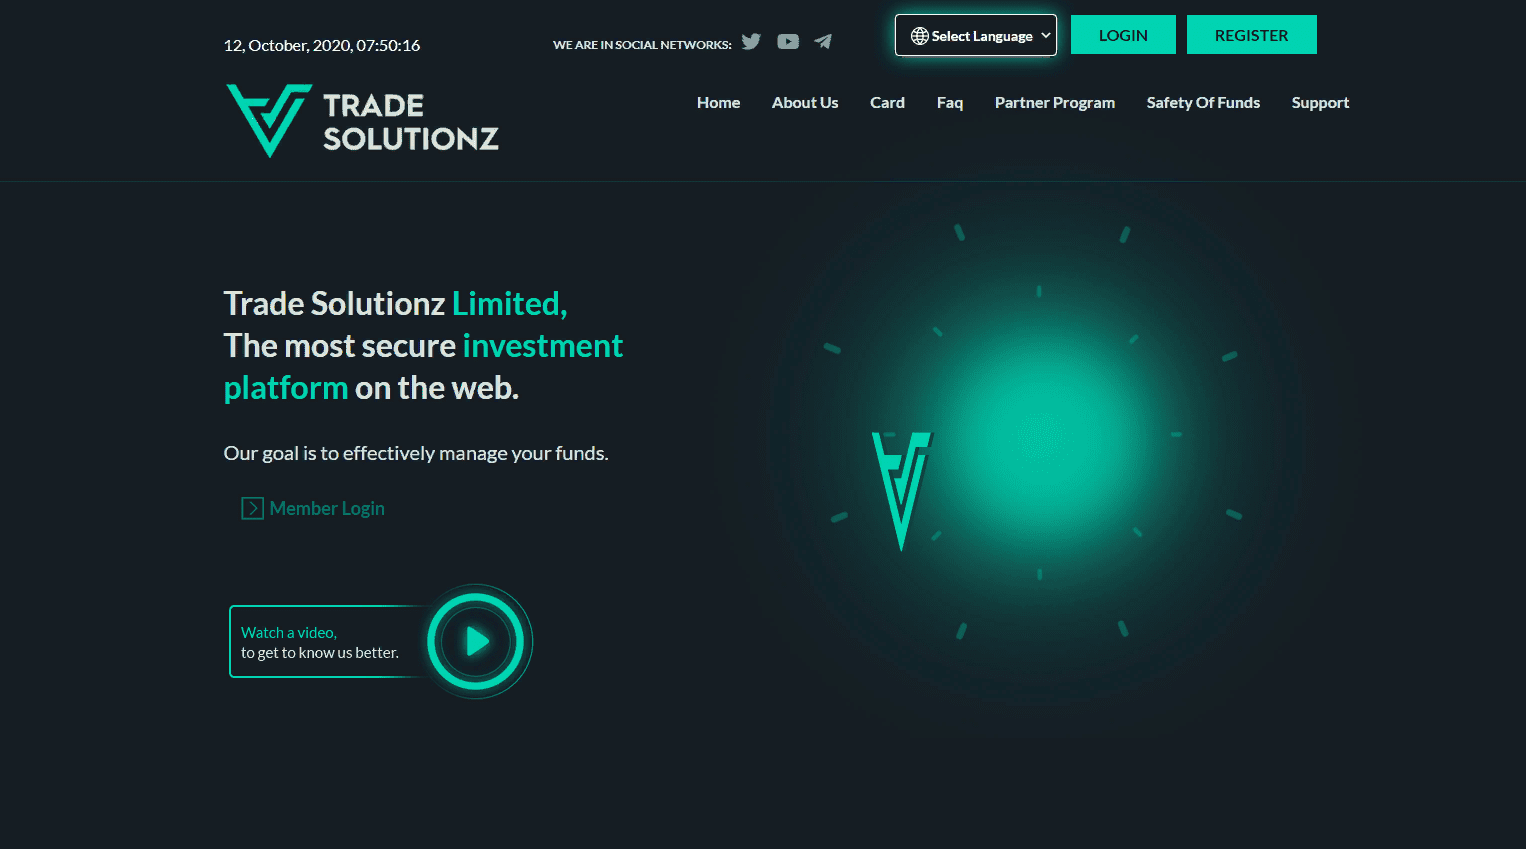 Trade Solutionz Limited